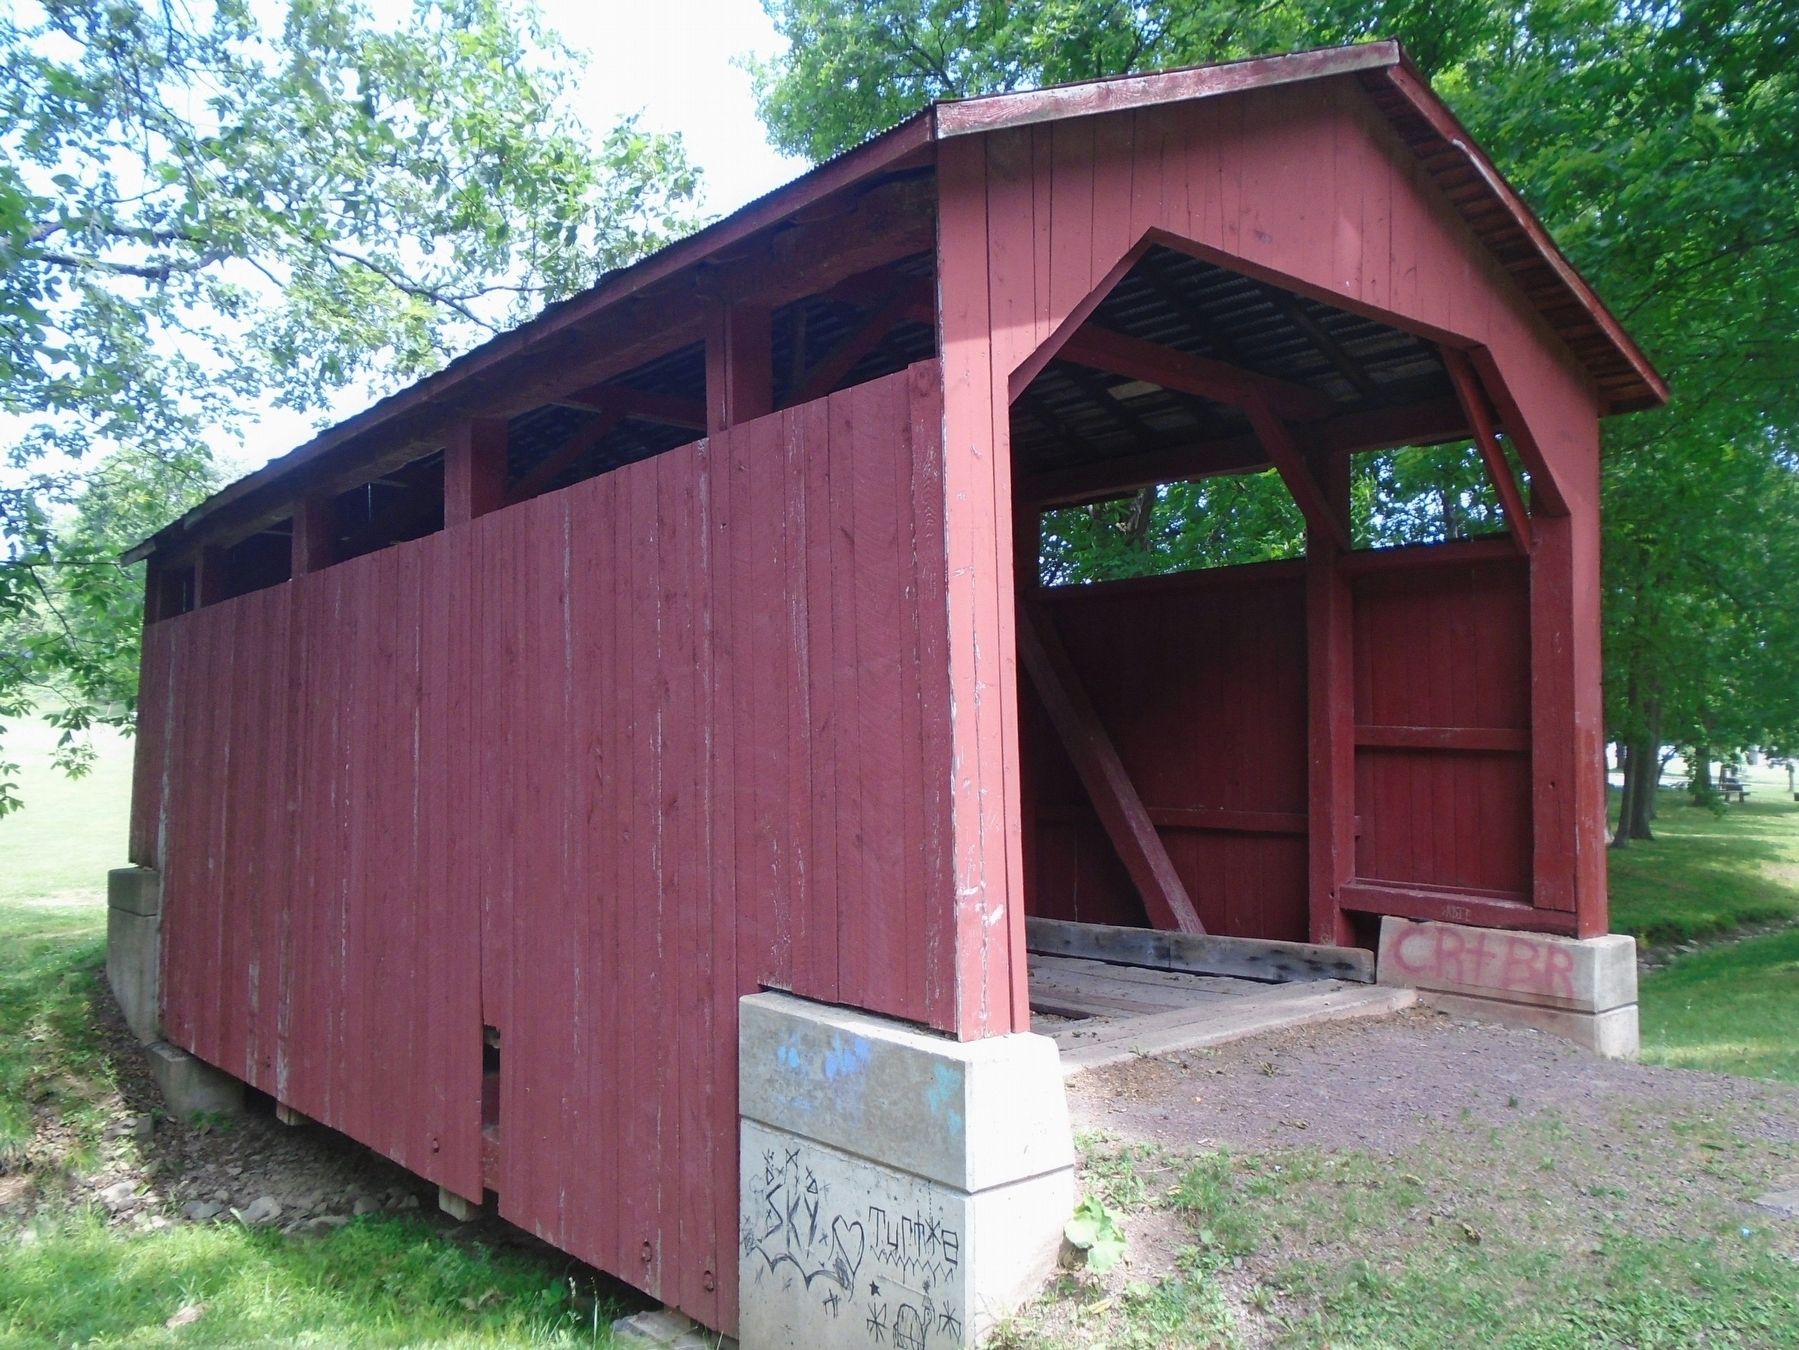 Fowlersville Covered Bridge image. Click for full size.